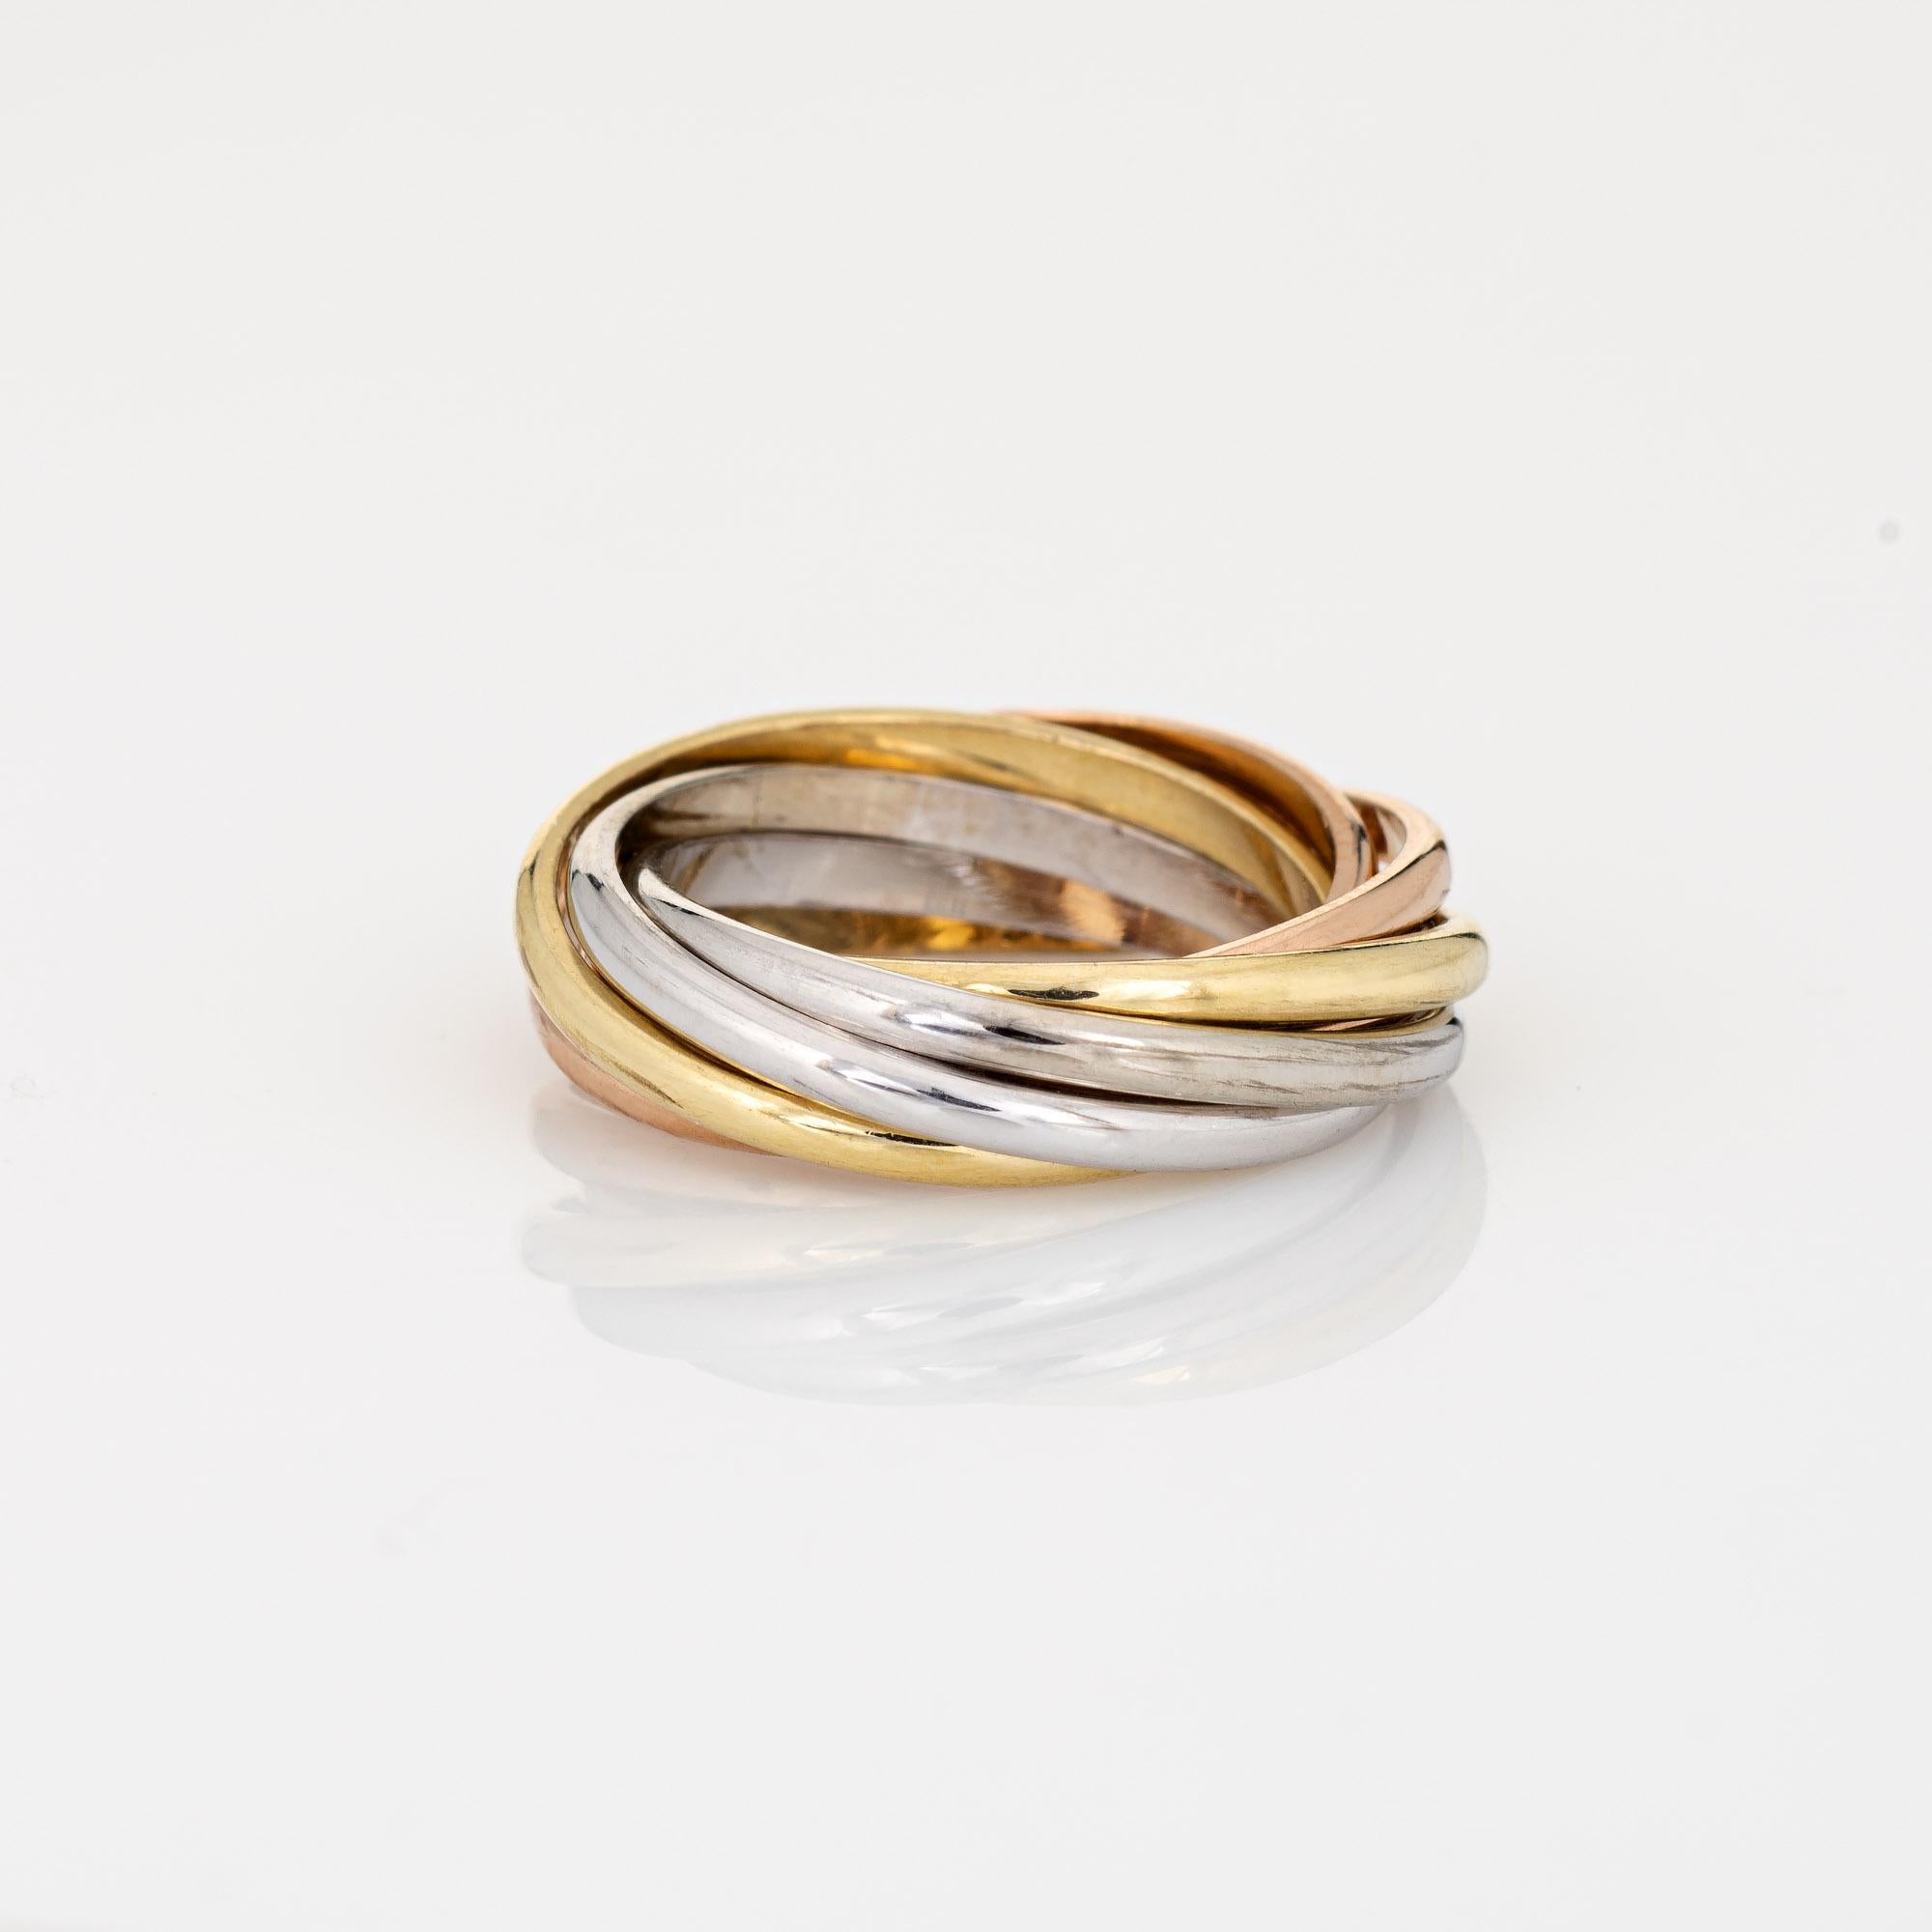 Vintage Cartier 7 band Trinity ring crafted in 18k yellow, white & rose gold.  

The Cartier ring features bands of 18k rose, yellow & white gold. Each band measures 1.5mm wide. The ring is great worn alone or layered with your fine jewelry from any